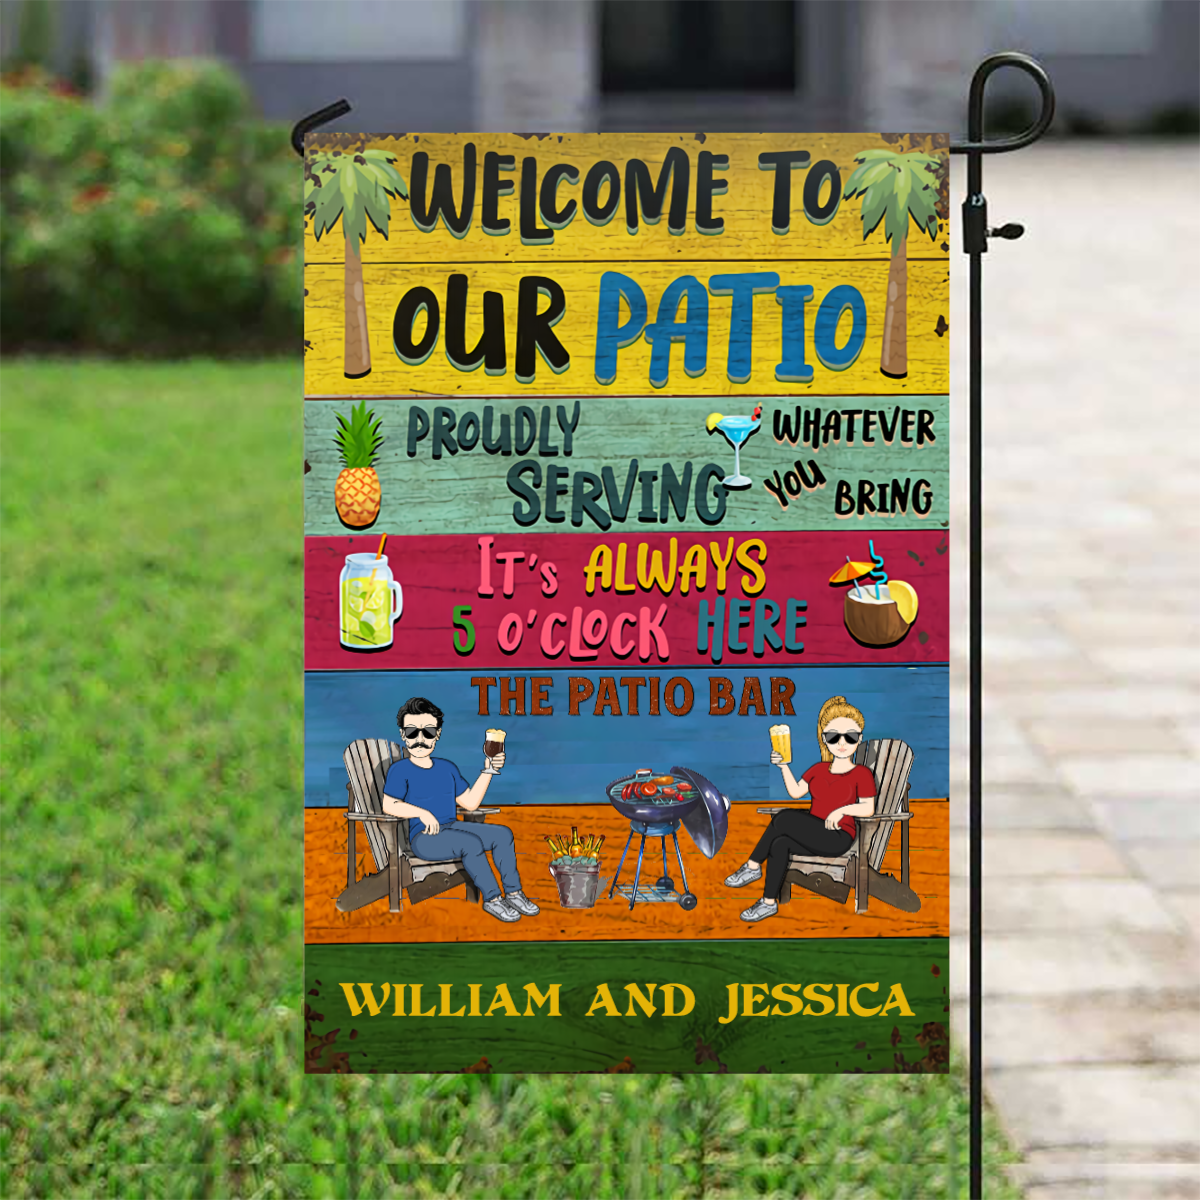 Patio Welcome Grilling Proudly Serving Whatever You Bring - Personalized Graden & House Flag